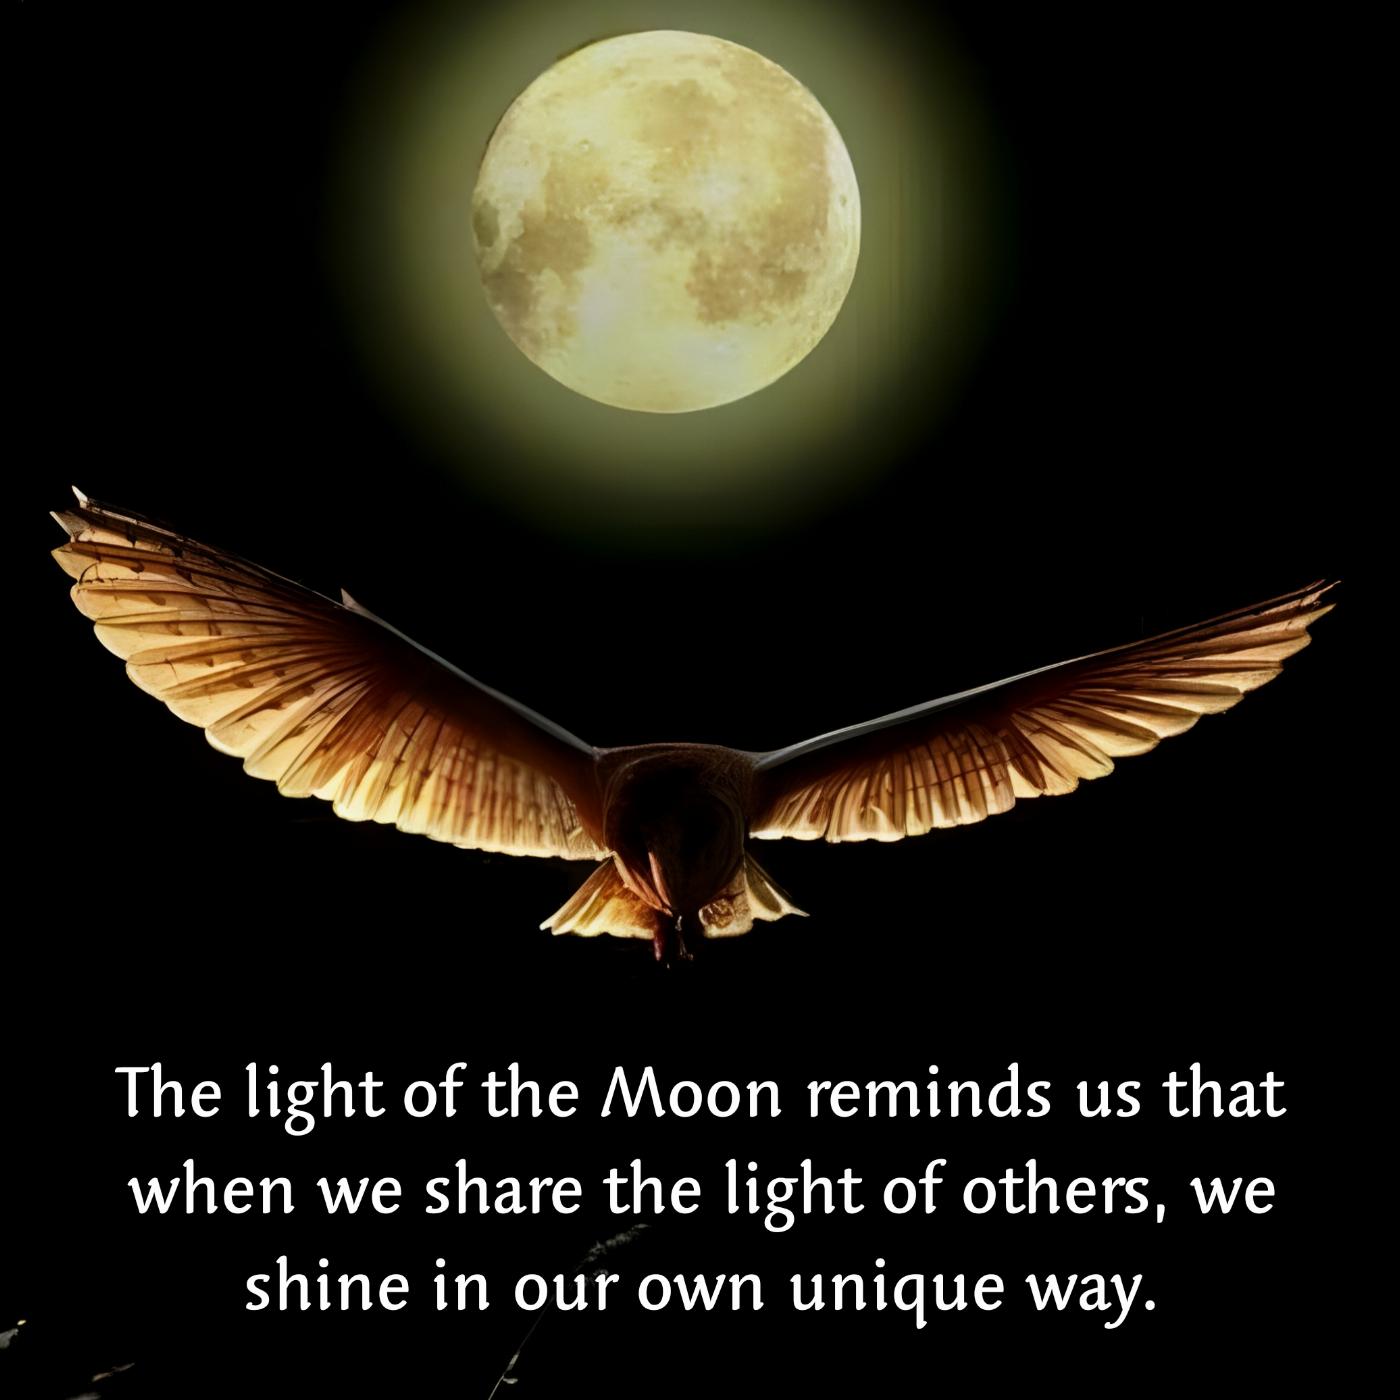 The light of the Moon reminds us that when we share the light